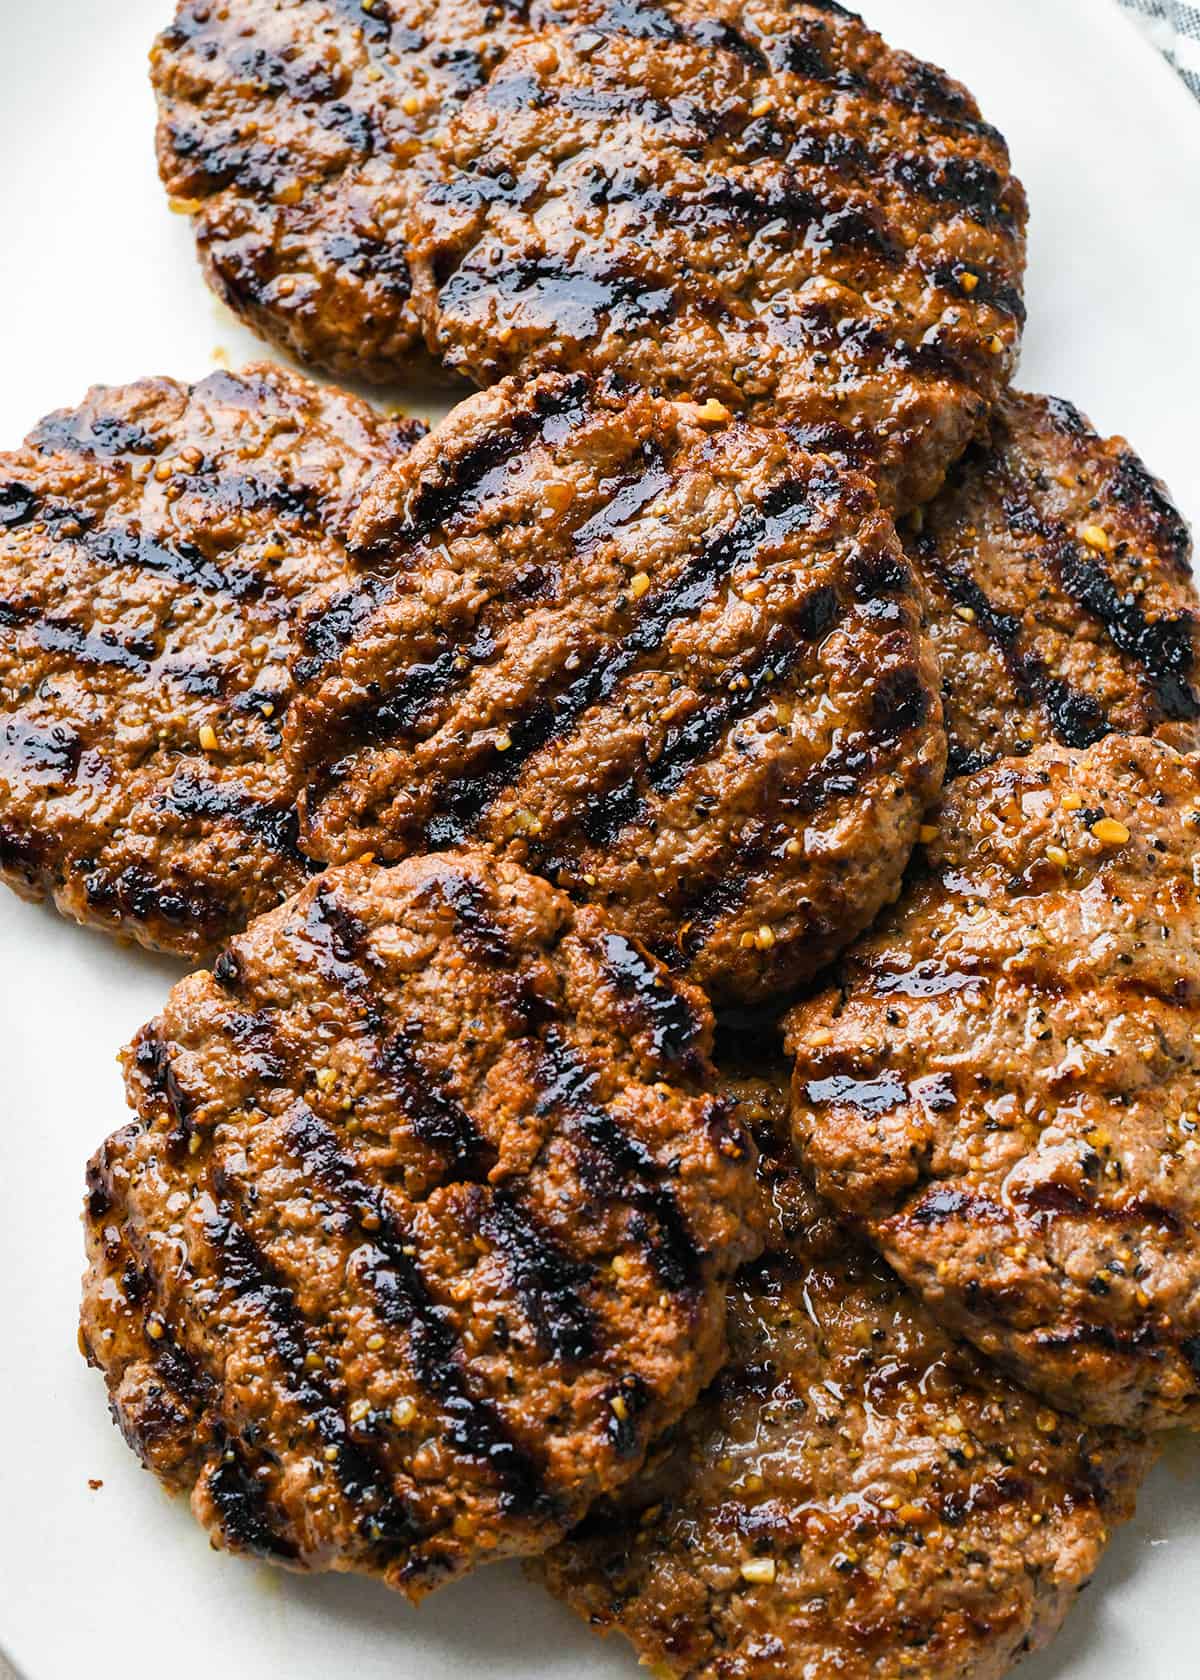 8 grilled hamburger patties on a plate